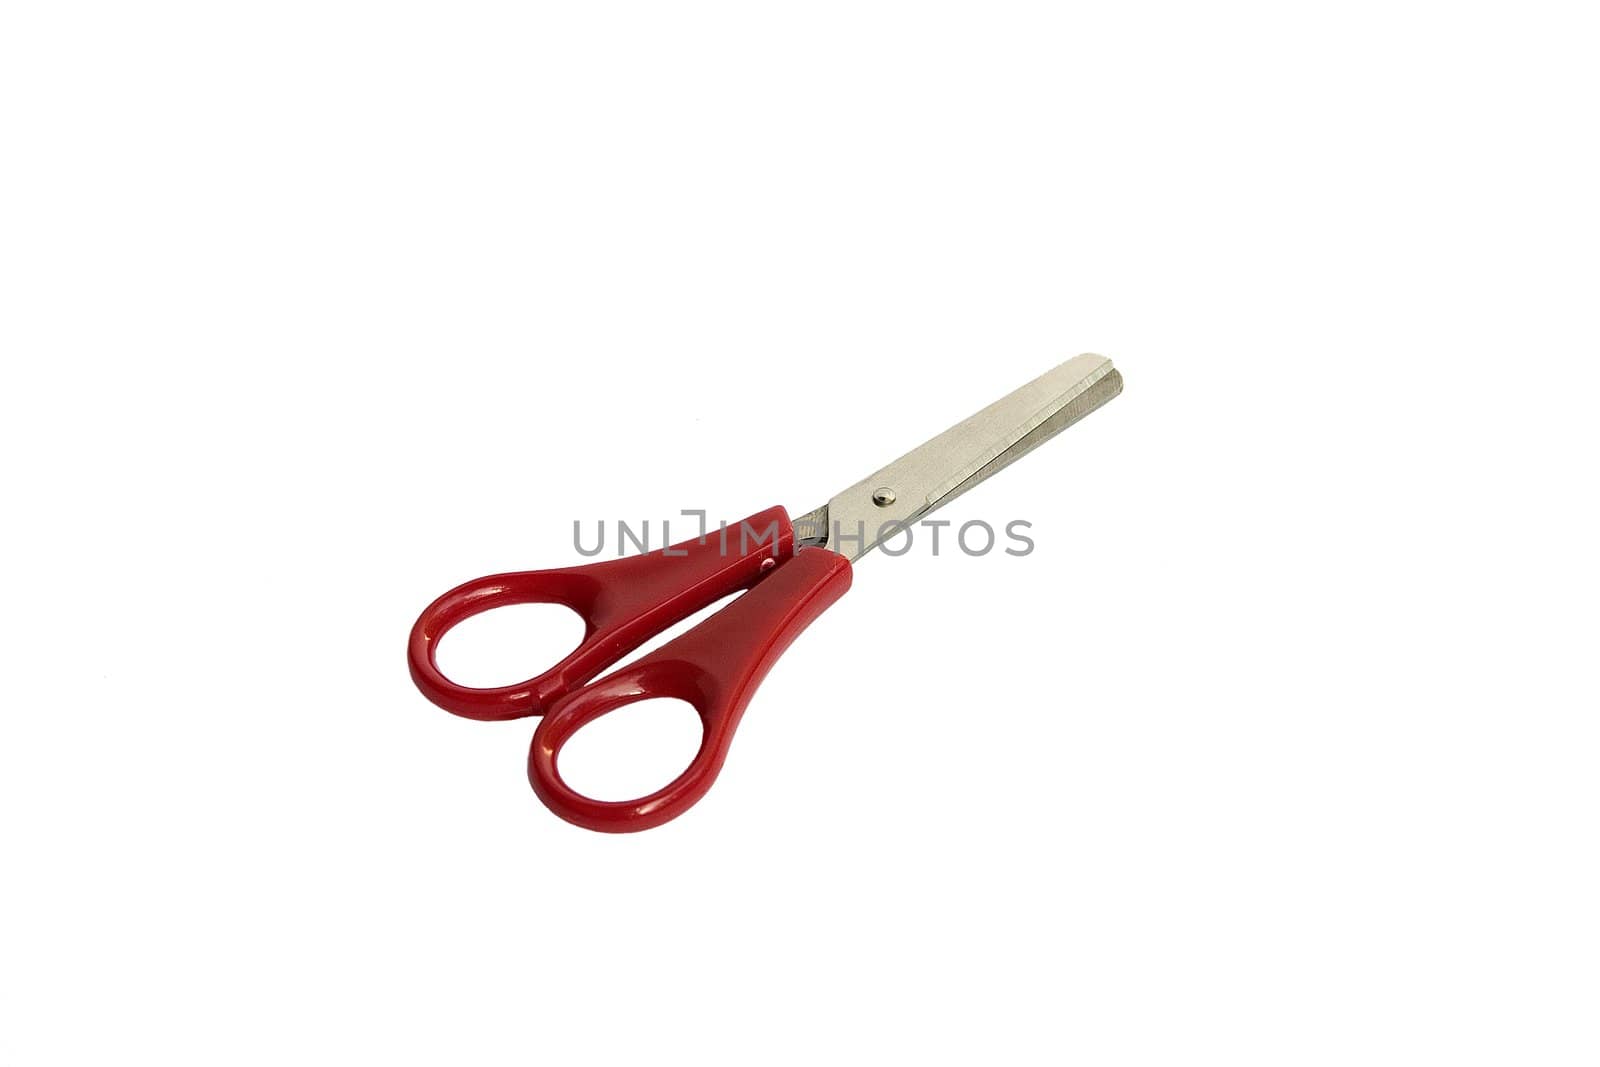 small scissors isolated on white background